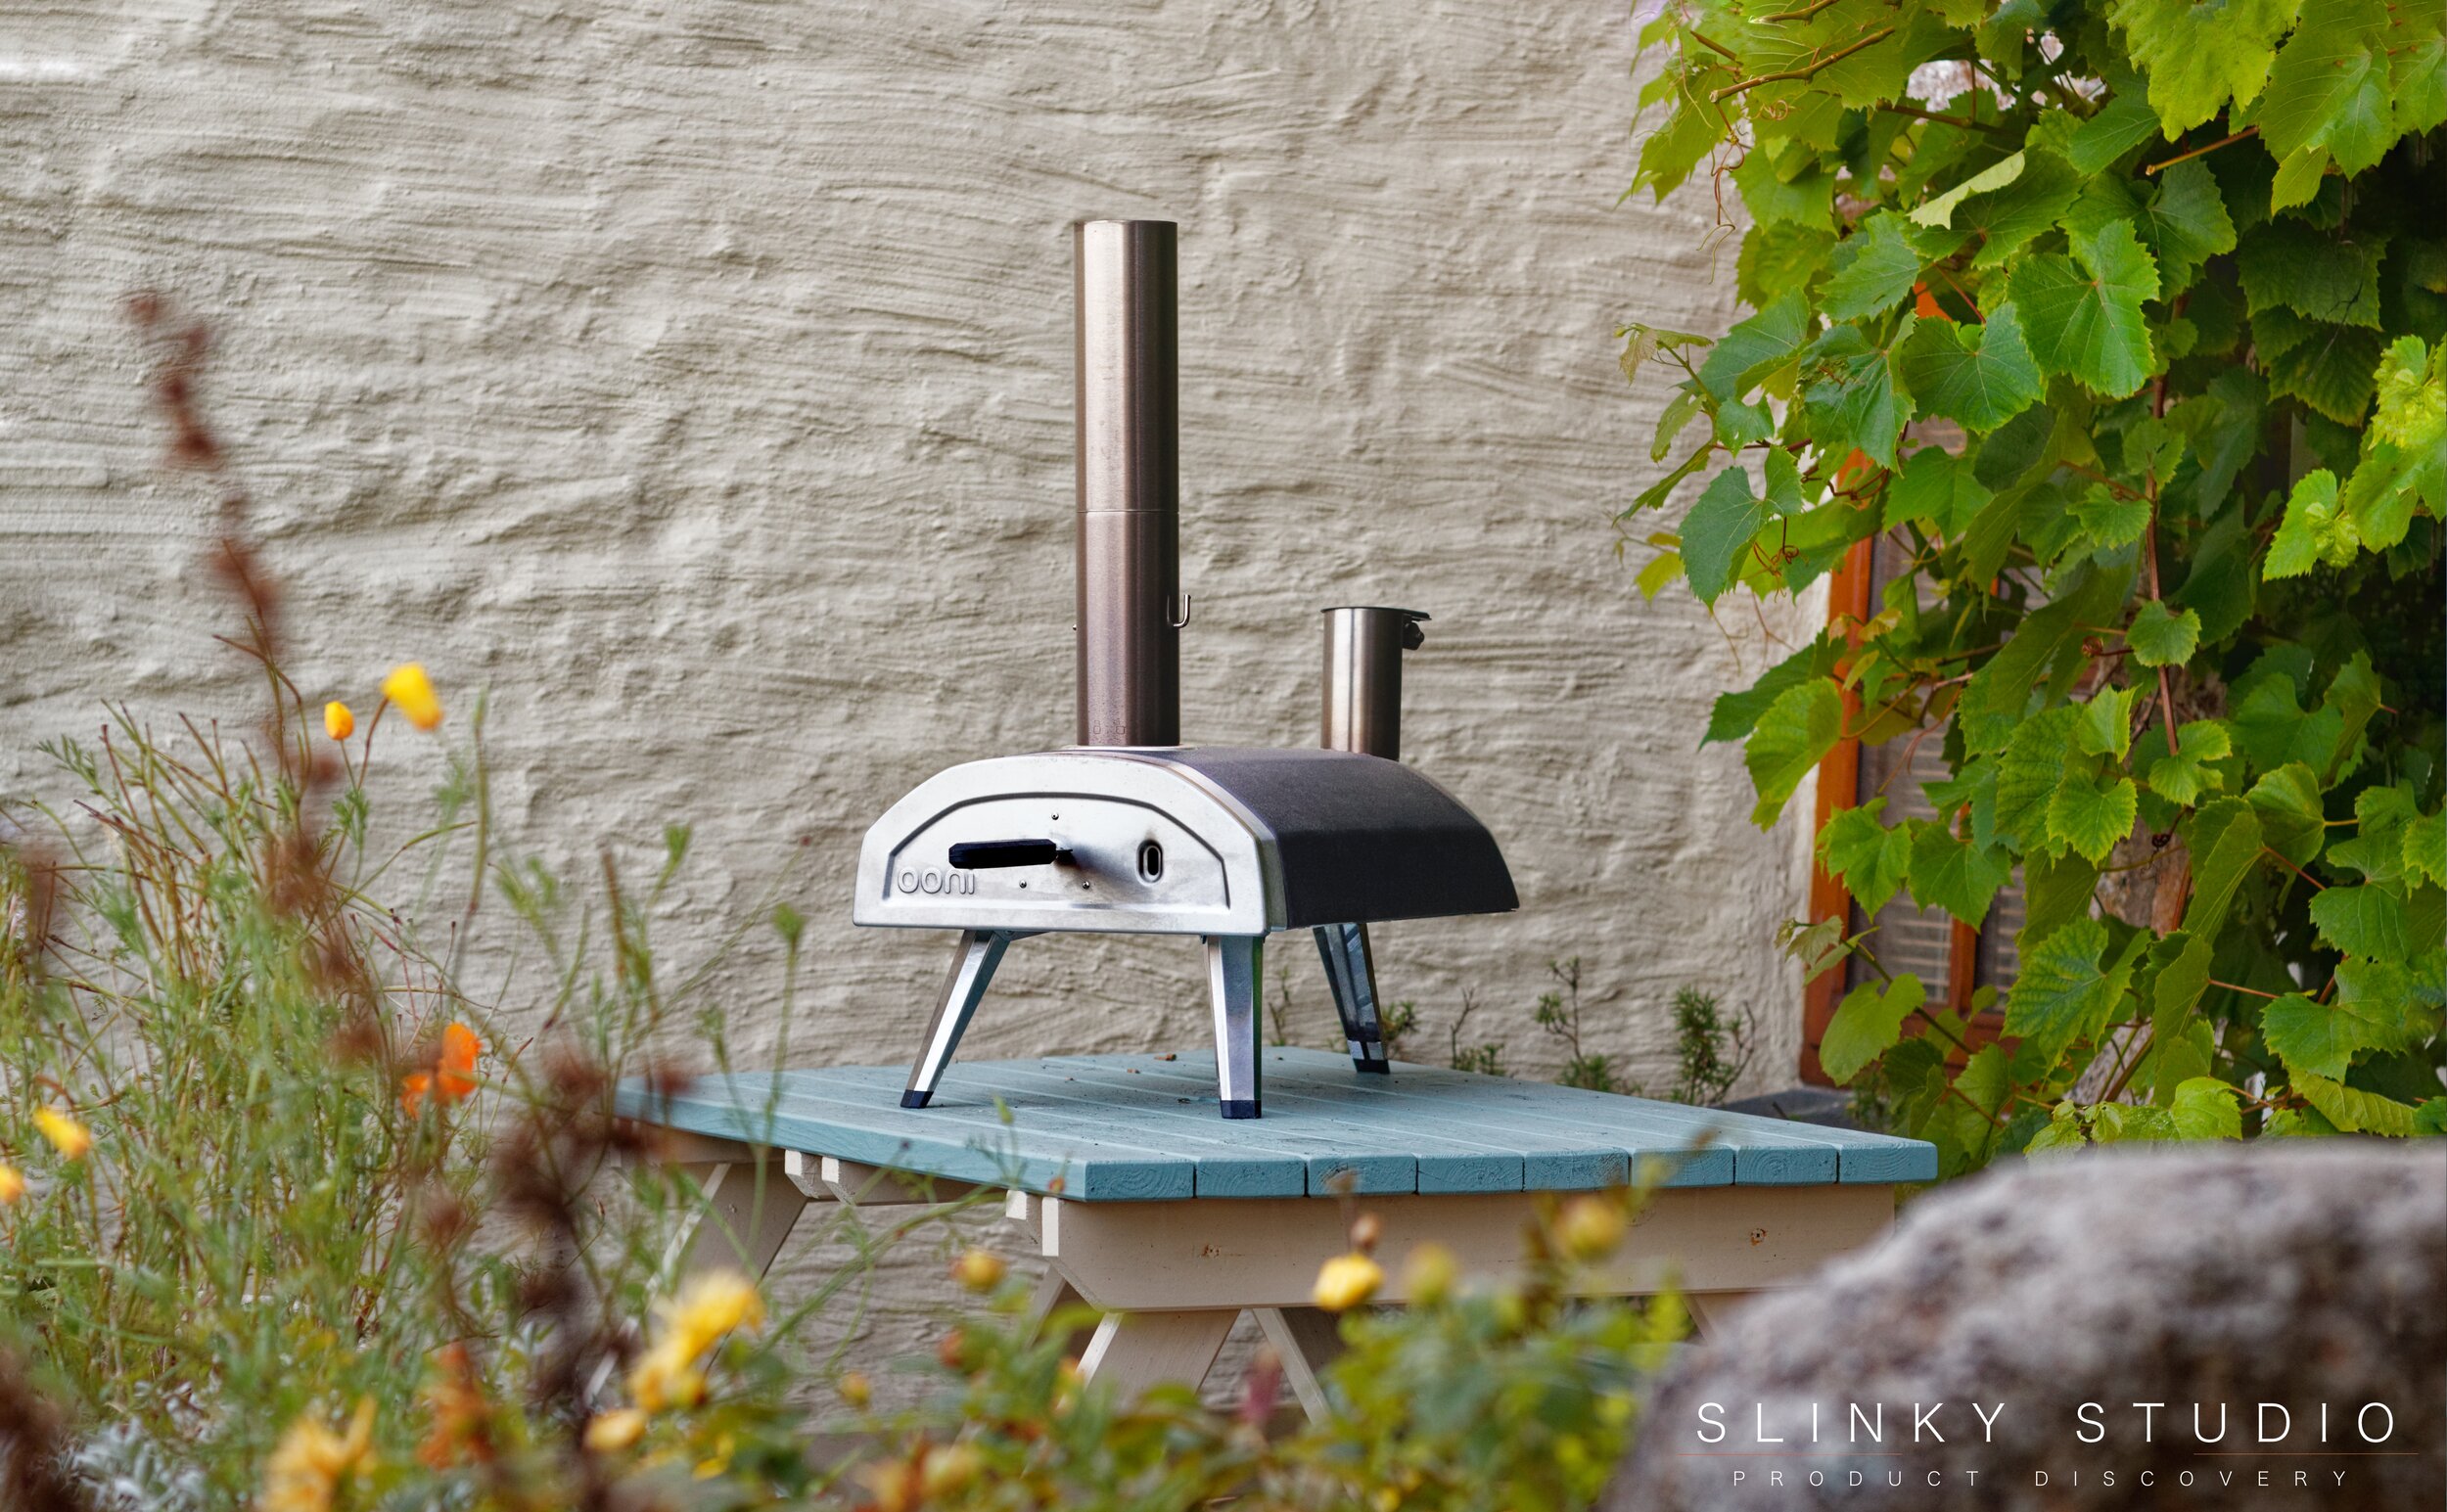 Ooni Frya Pizza Oven On Picnic Bench in front of Cornish Cottage.jpg